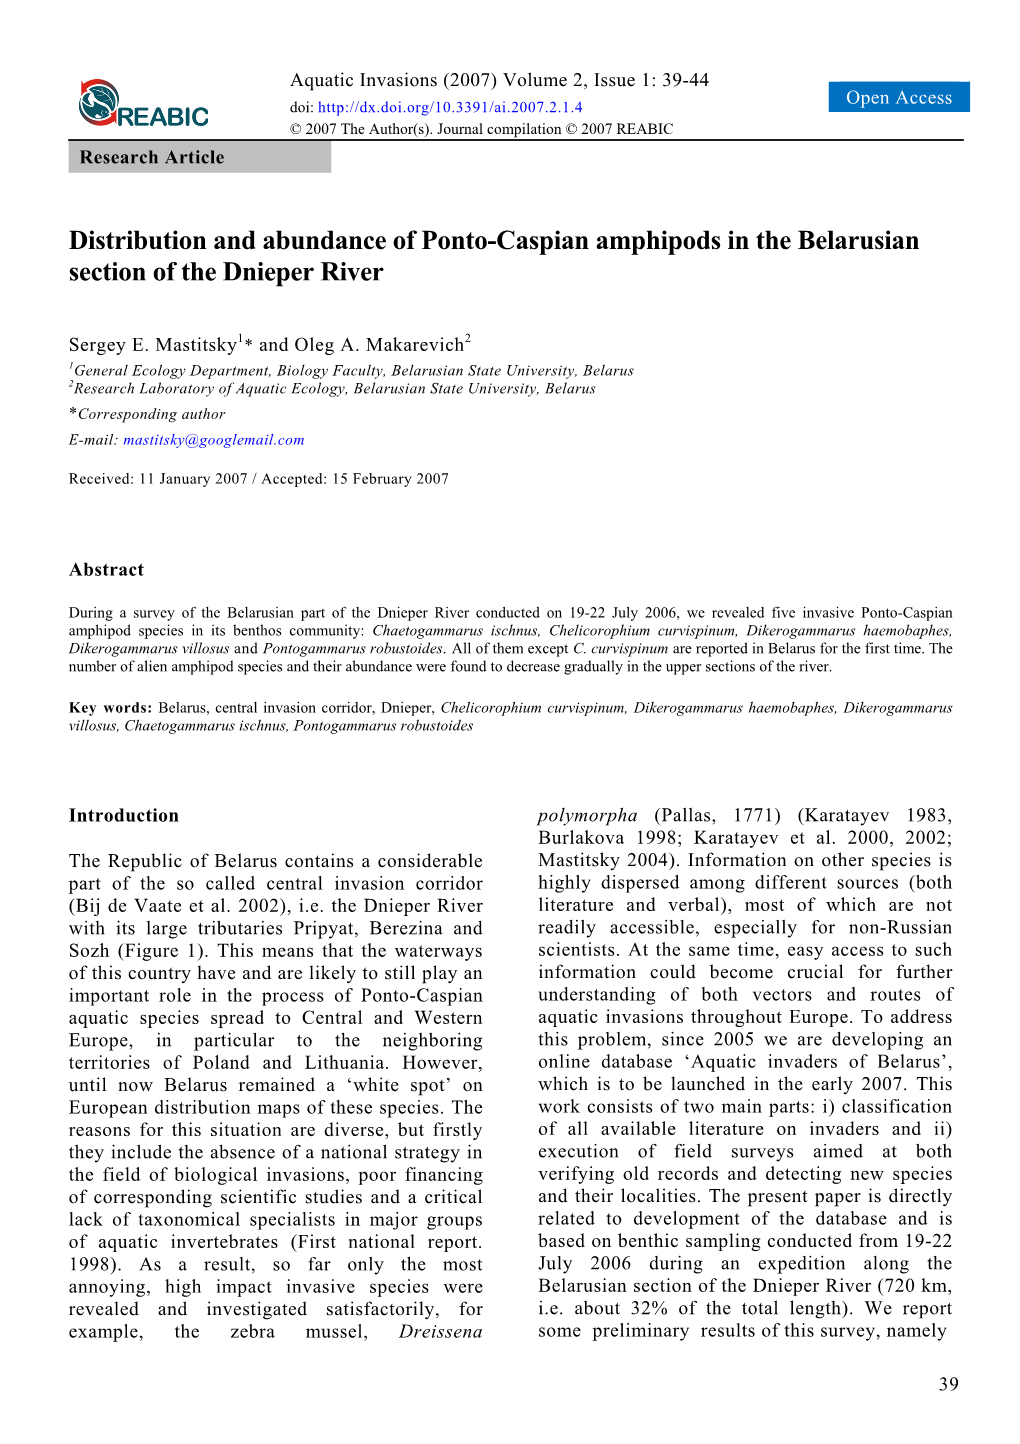 Distribution and Abundance of Ponto-Caspian Amphipods in the Belarusian Section of the Dnieper River